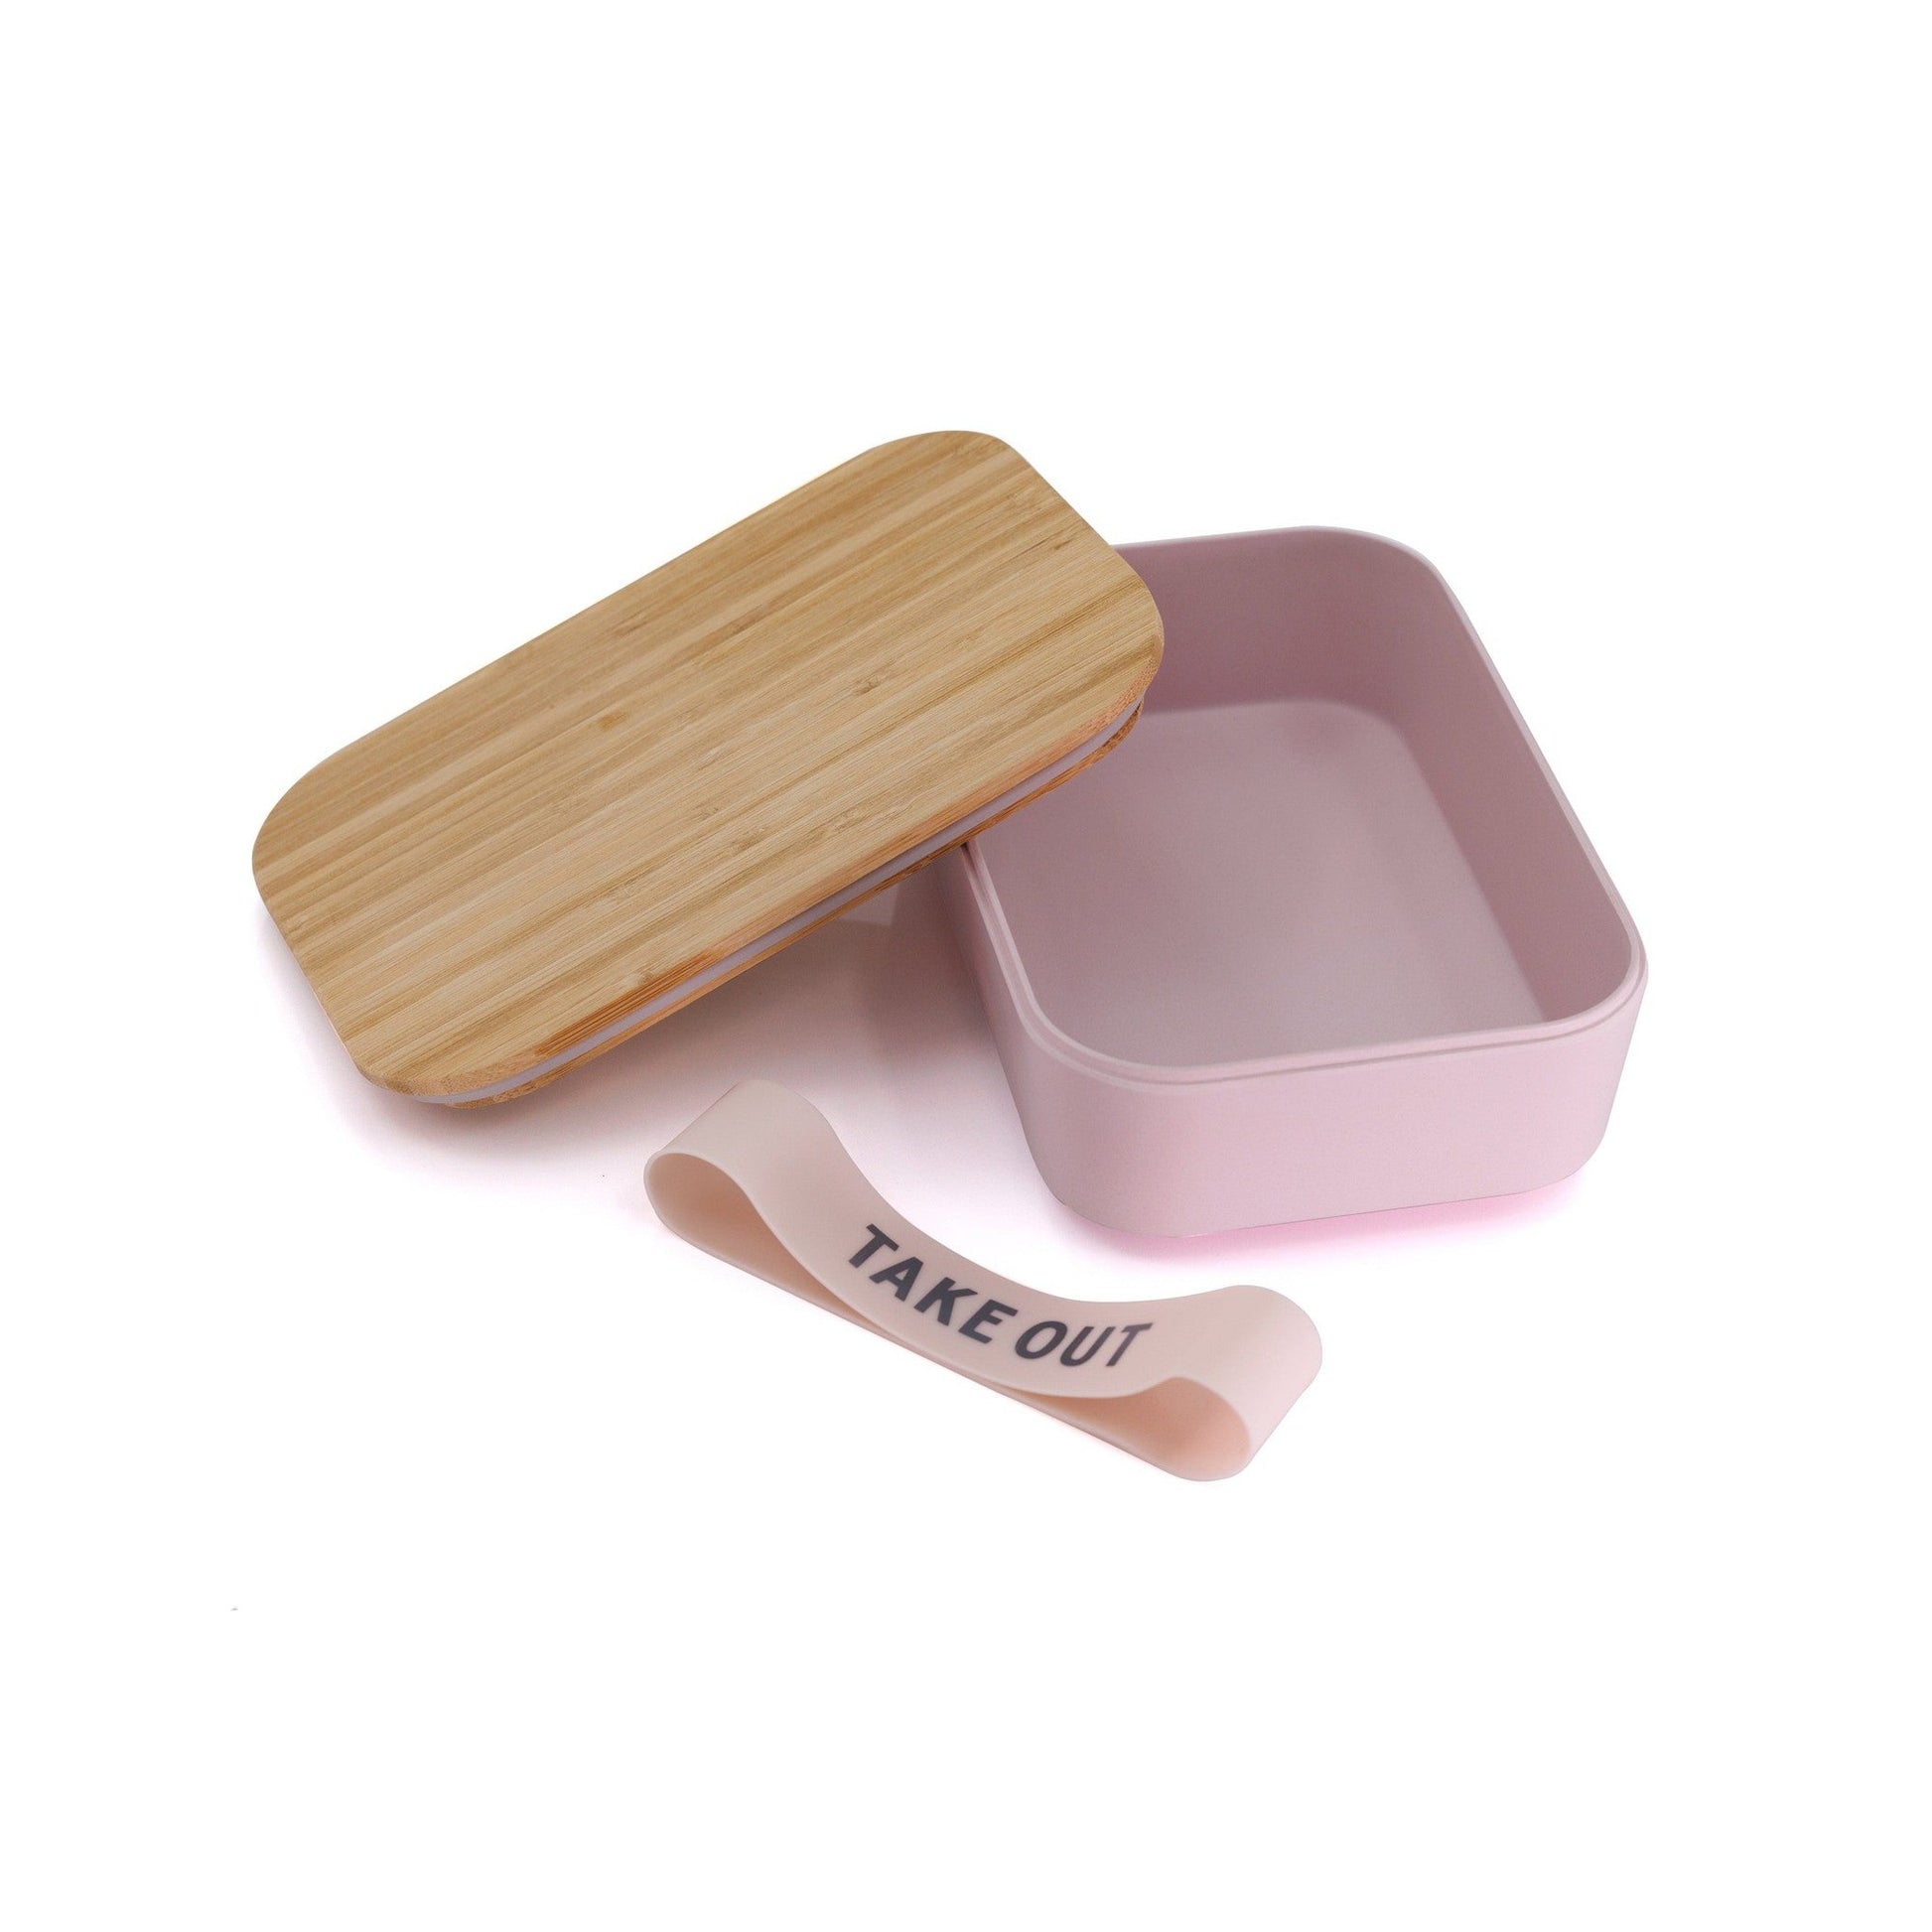 Take Out Bamboo Lunch Box in Blush Pink | Eco-Friendly and Sustainable | 7.5" x 5" x 2"